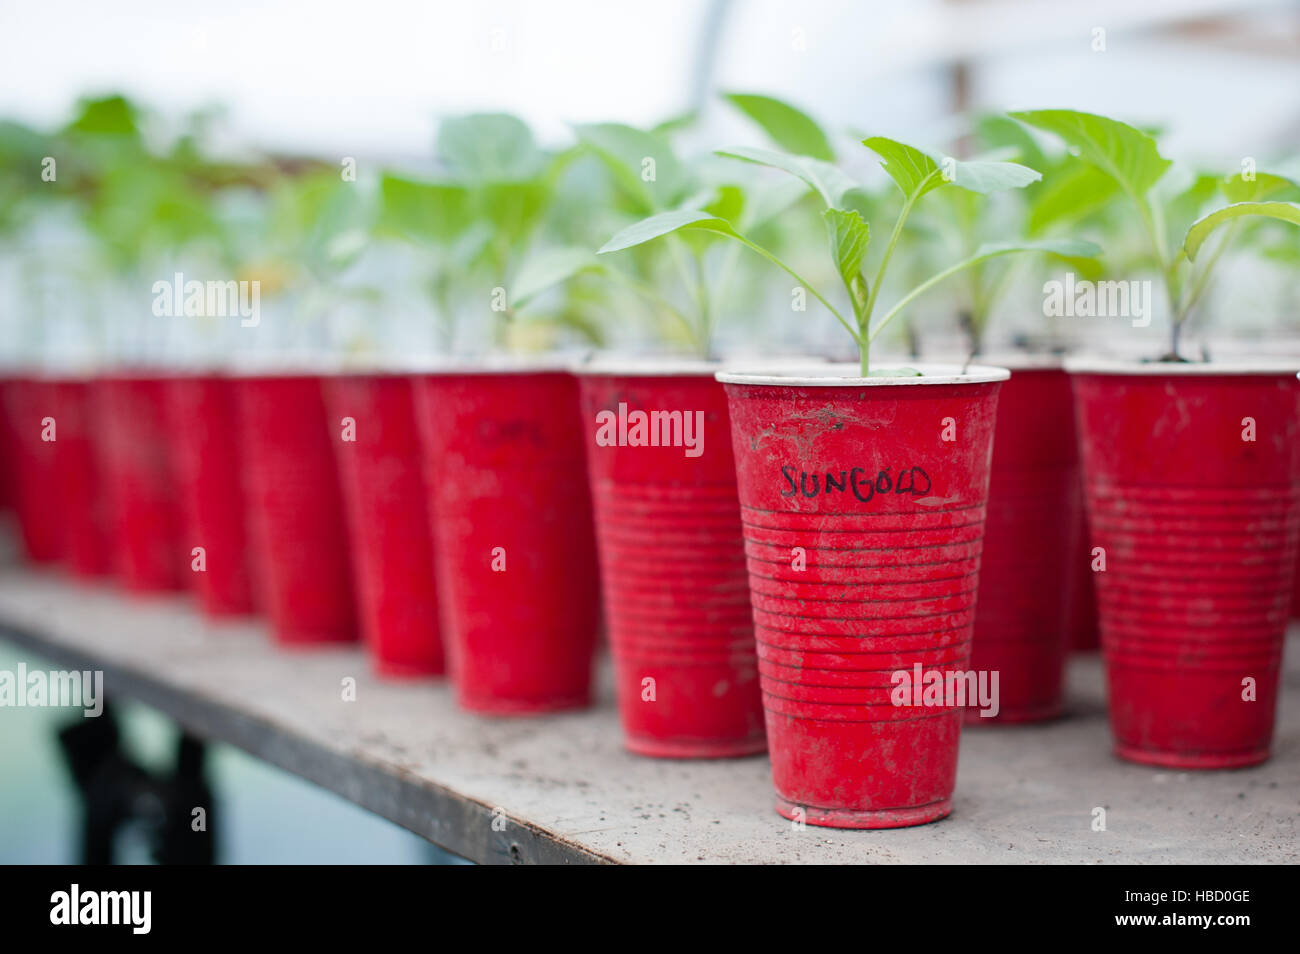 https://c8.alamy.com/comp/HBD0GE/rows-of-seedling-plants-in-red-plastic-cups-in-plant-nursery-HBD0GE.jpg